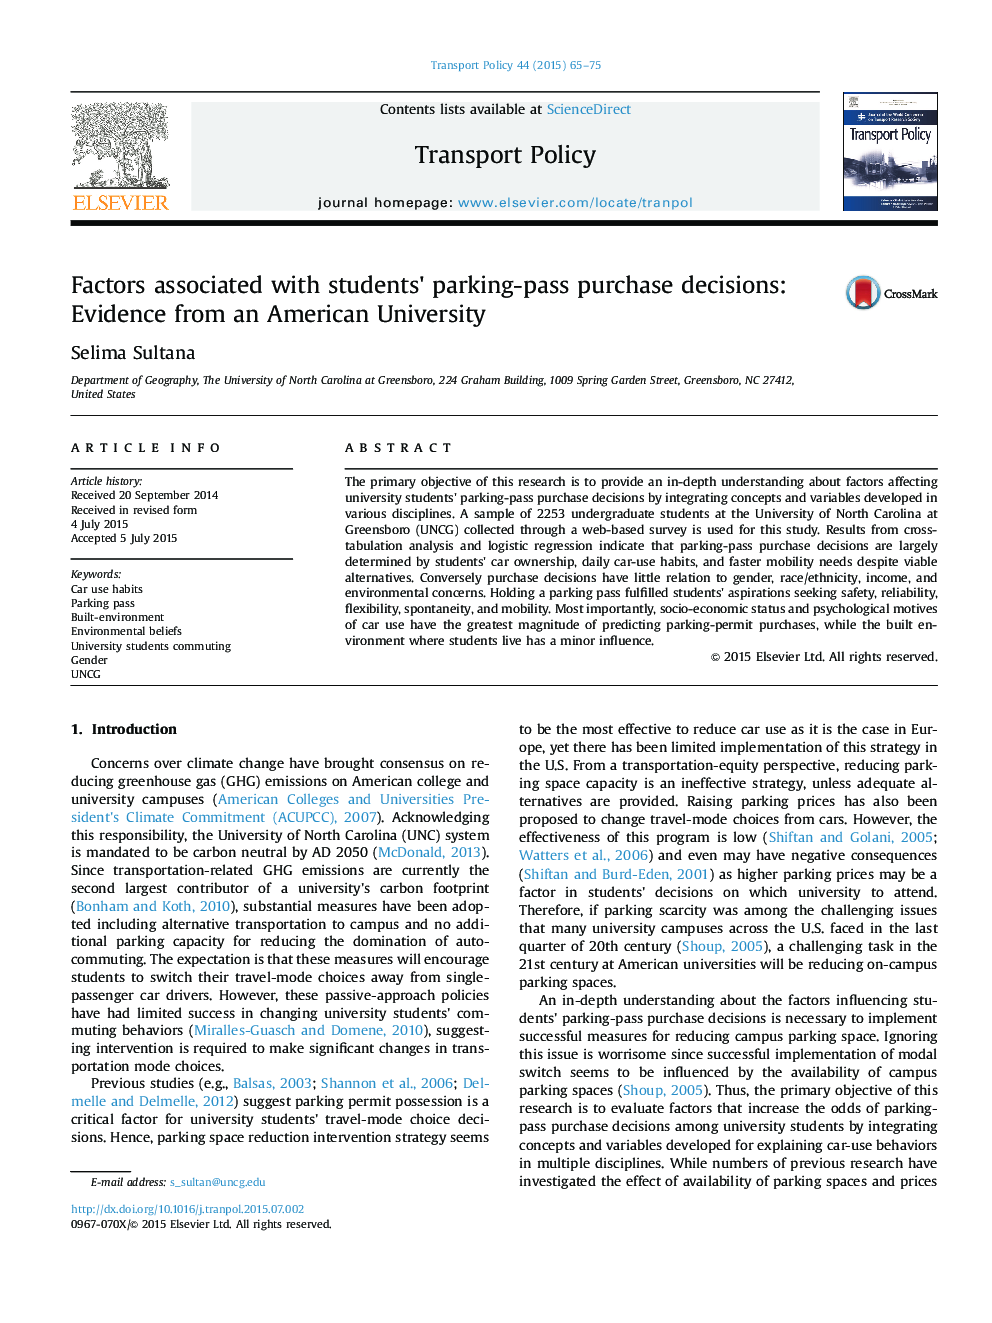 Factors associated with students' parking-pass purchase decisions: Evidence from an American University